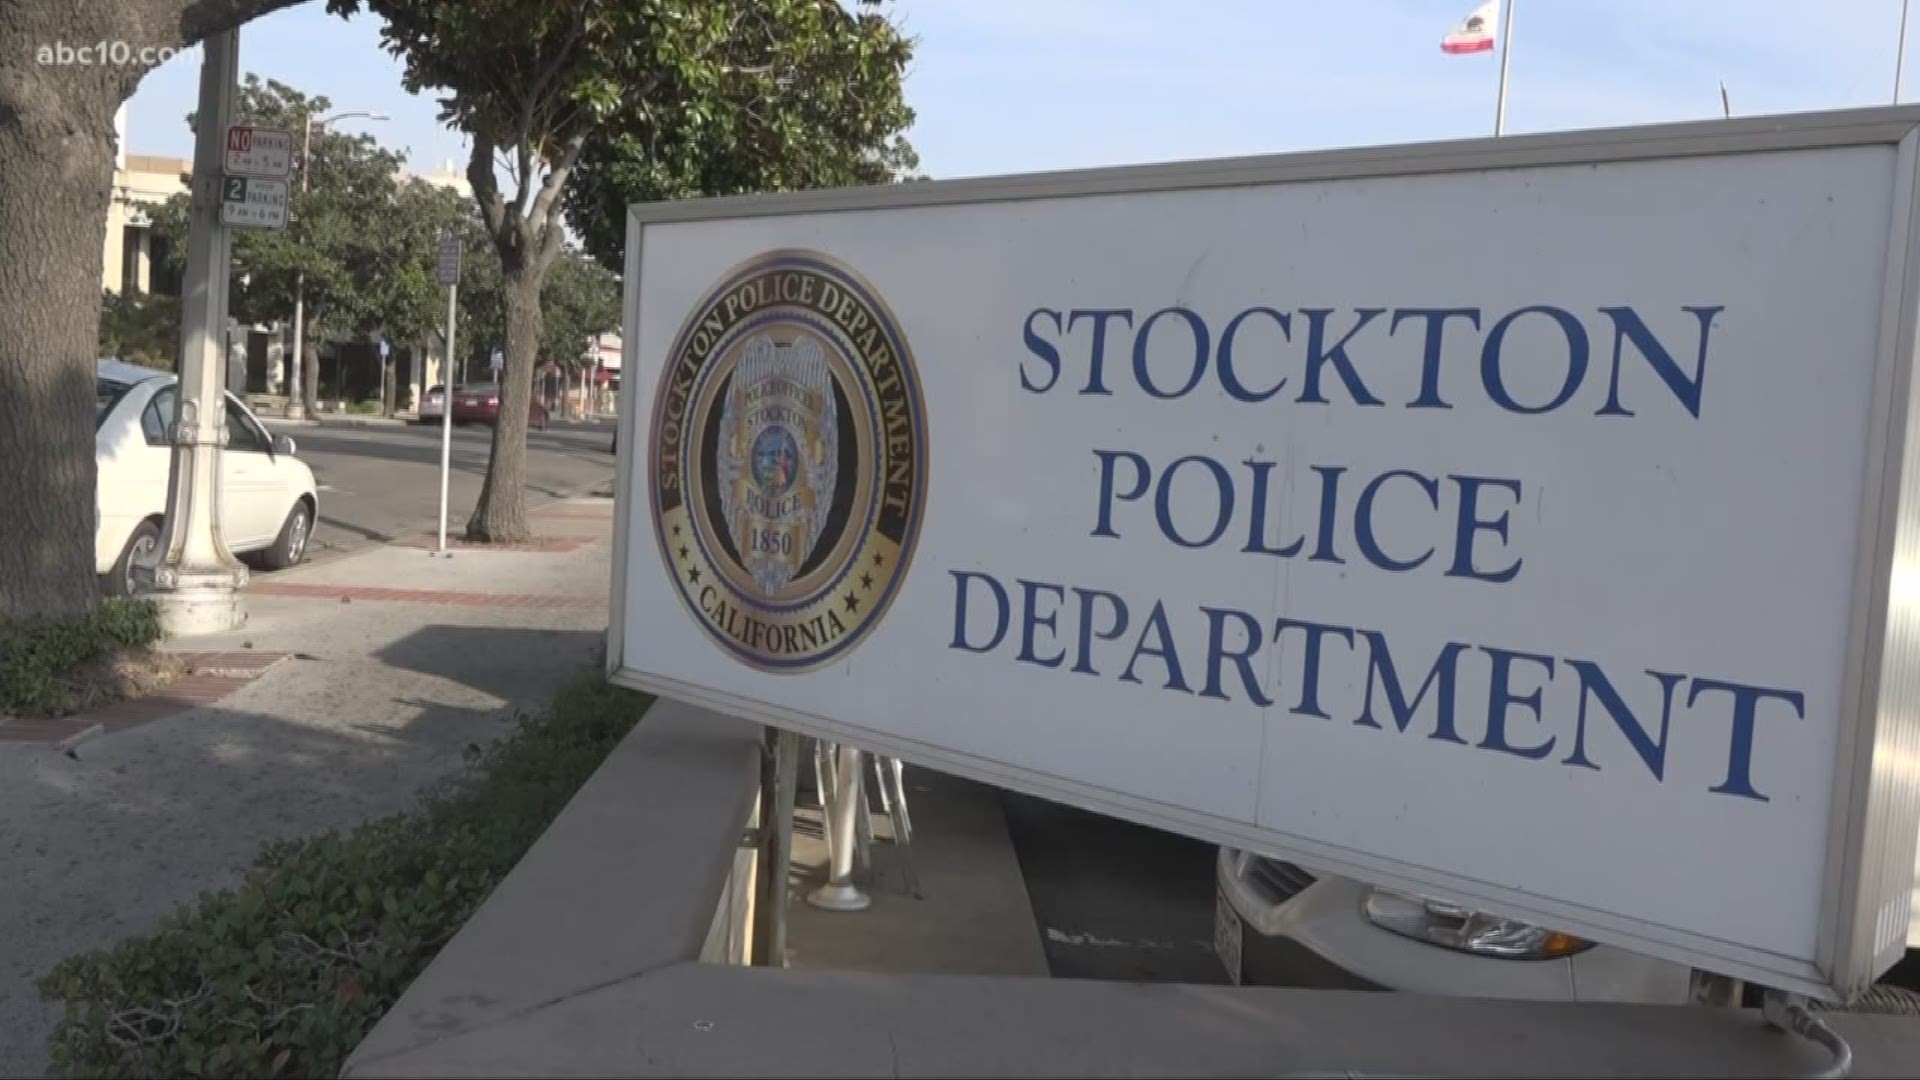 Stockton Police devised a three-year plan in combating crime that includes reducing city blight and hiring and recruiting a diverse workforce.